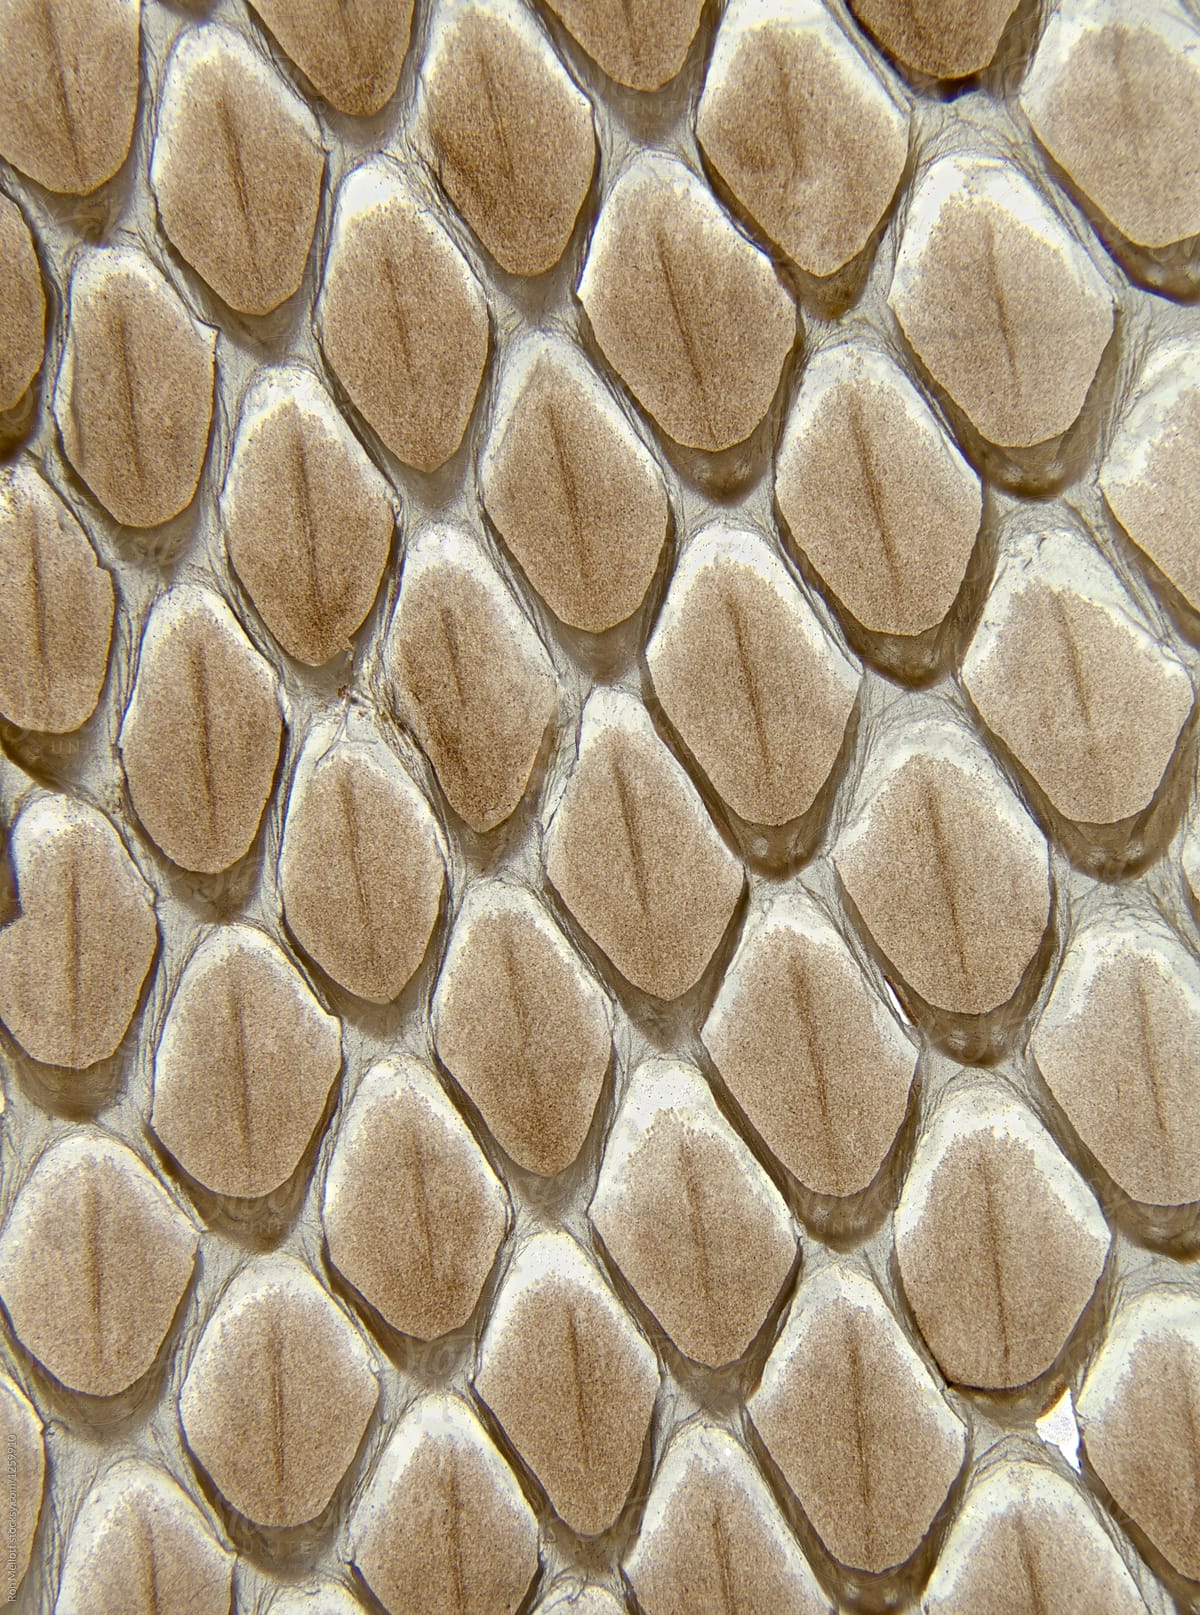 snake scales close up